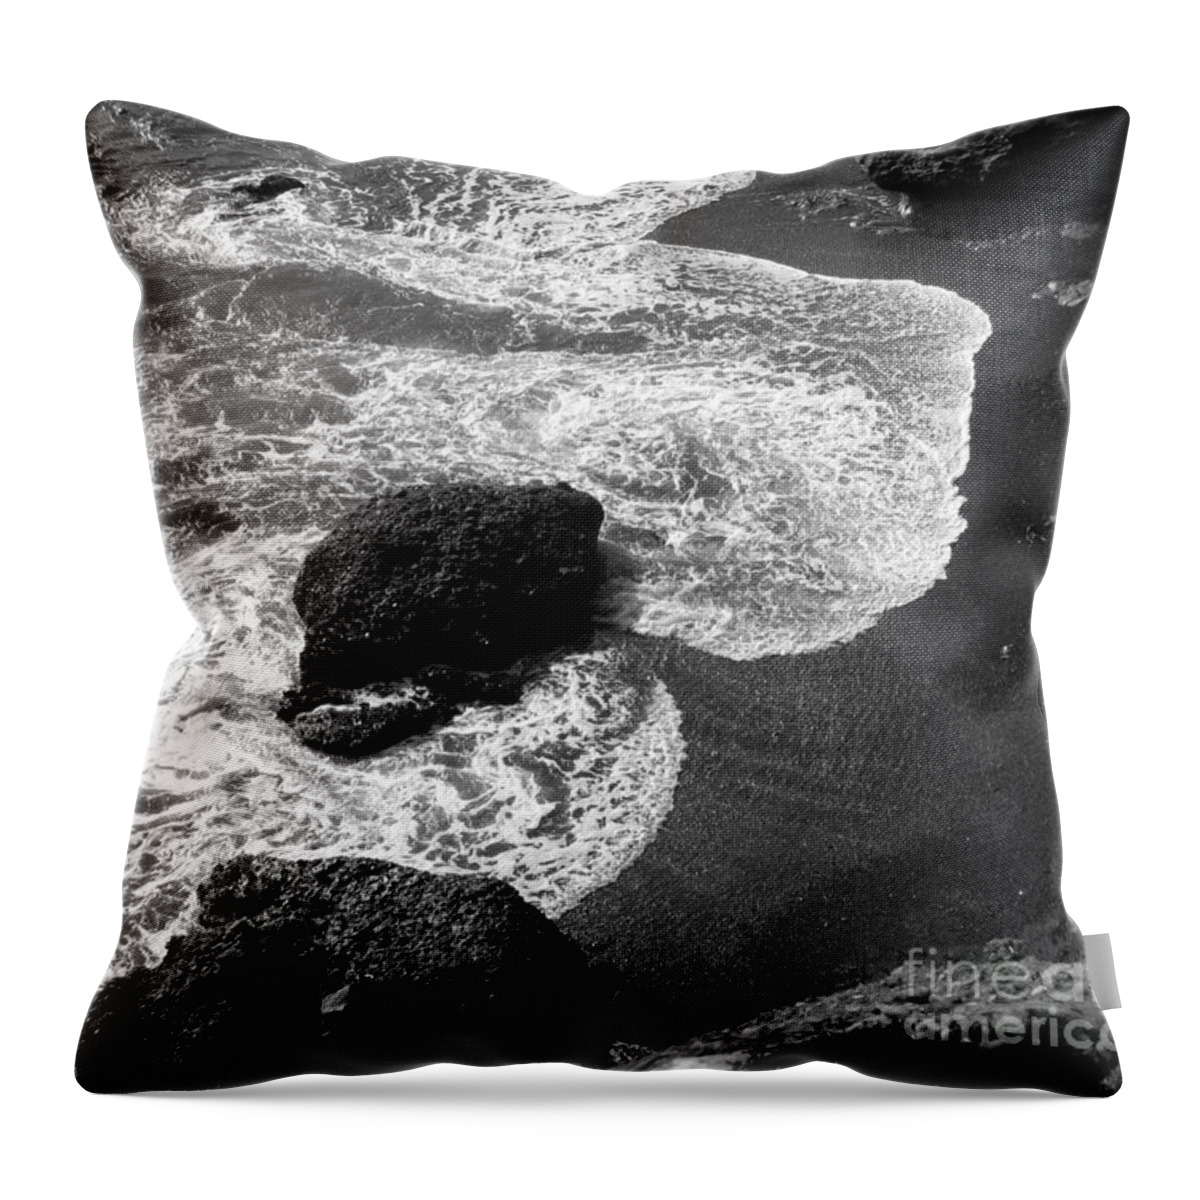 Point Lobos Throw Pillow featuring the photograph Sea Lion Cove by James B Toy